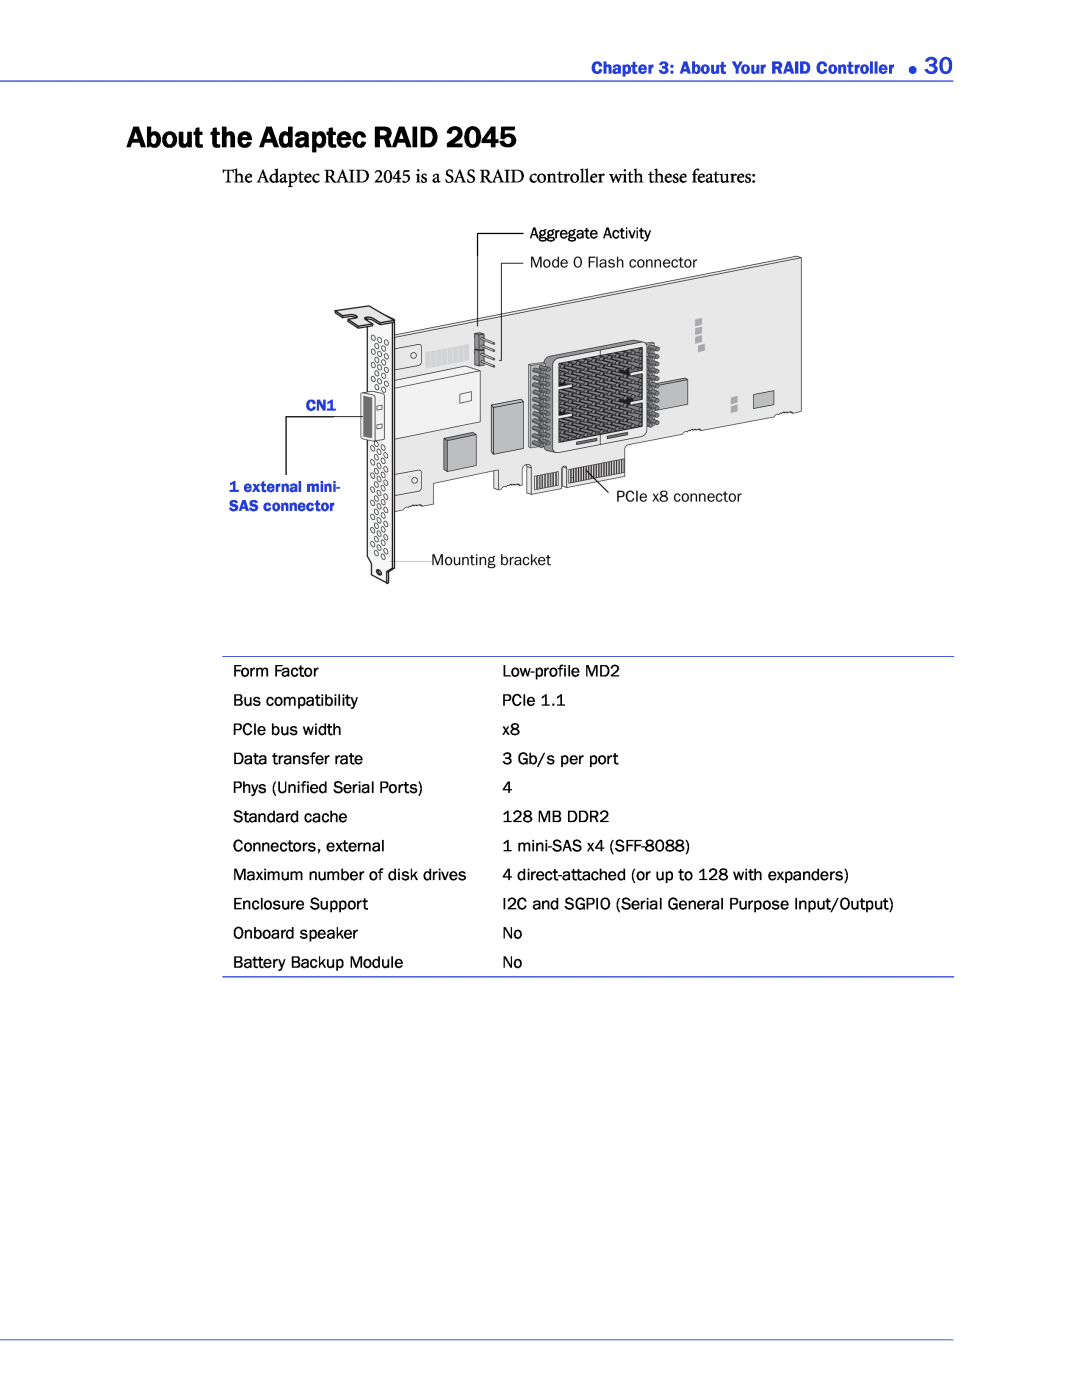 Adaptec 2268300R manual About the Adaptec RAID, The Adaptec RAID 2045 is a SAS RAID controller with these features 